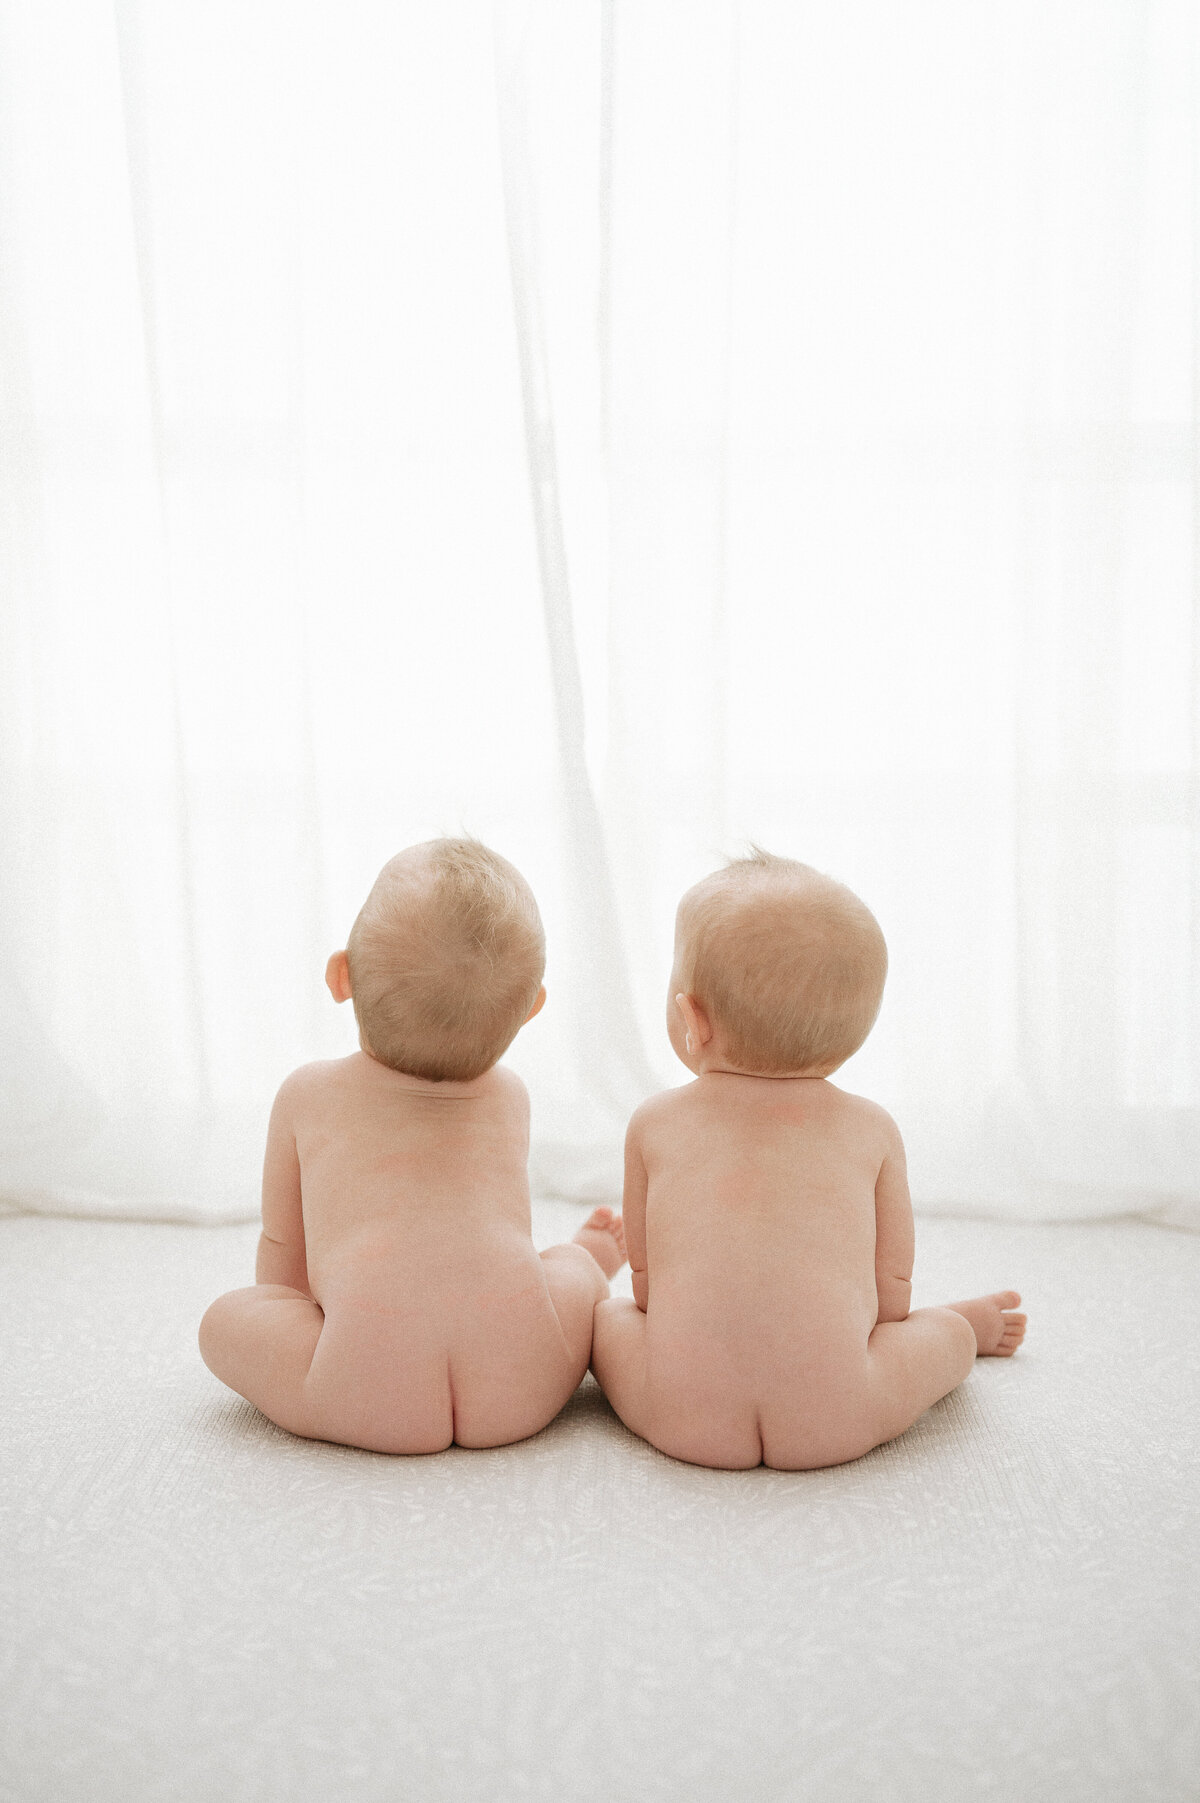 Two naked babies sit side by side looking out a window